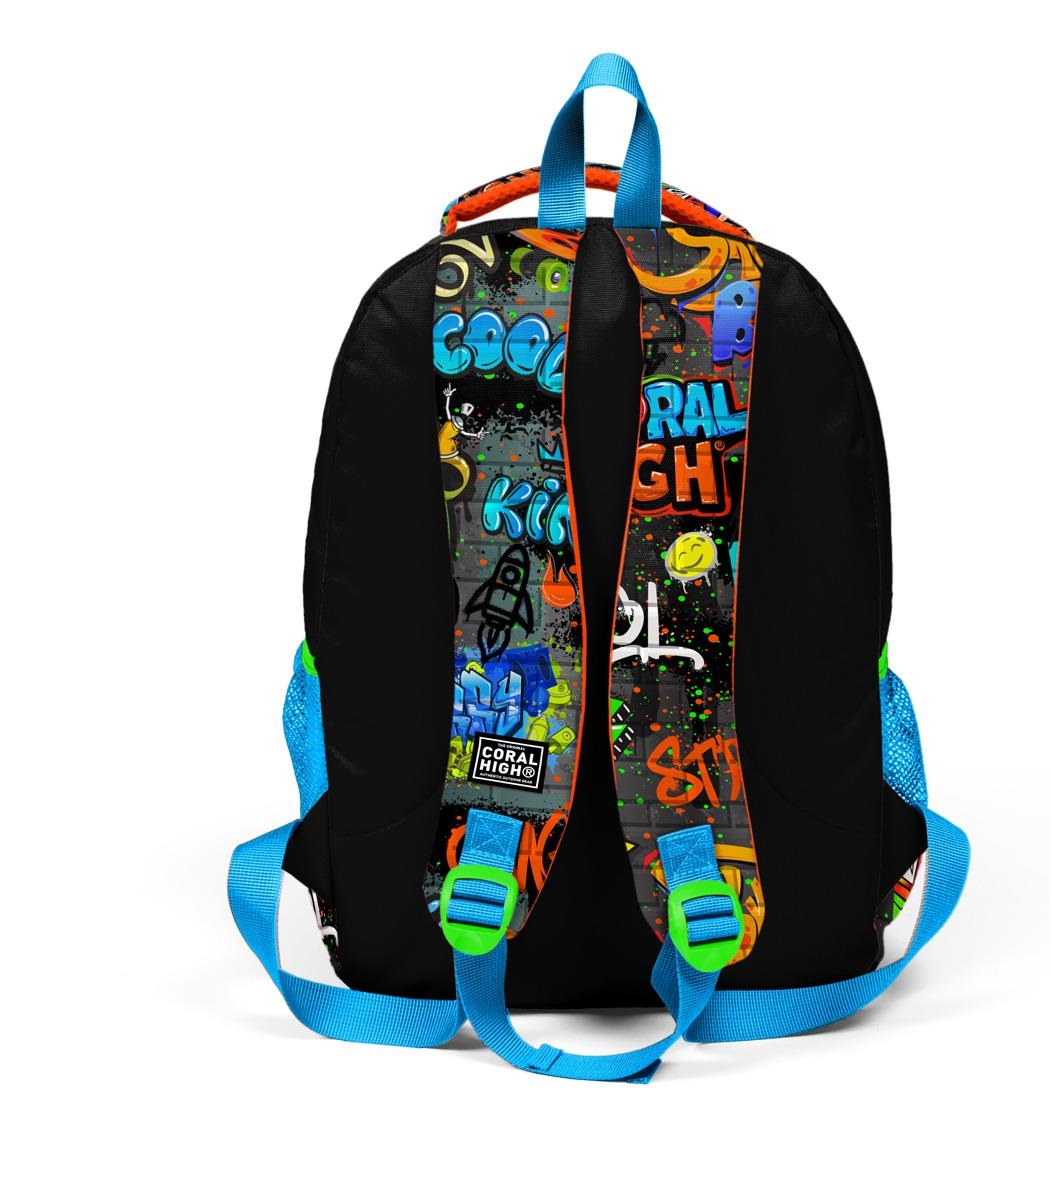 Coral High Kids Three Compartment School Backpack - Black Blue Graffiti Patterned